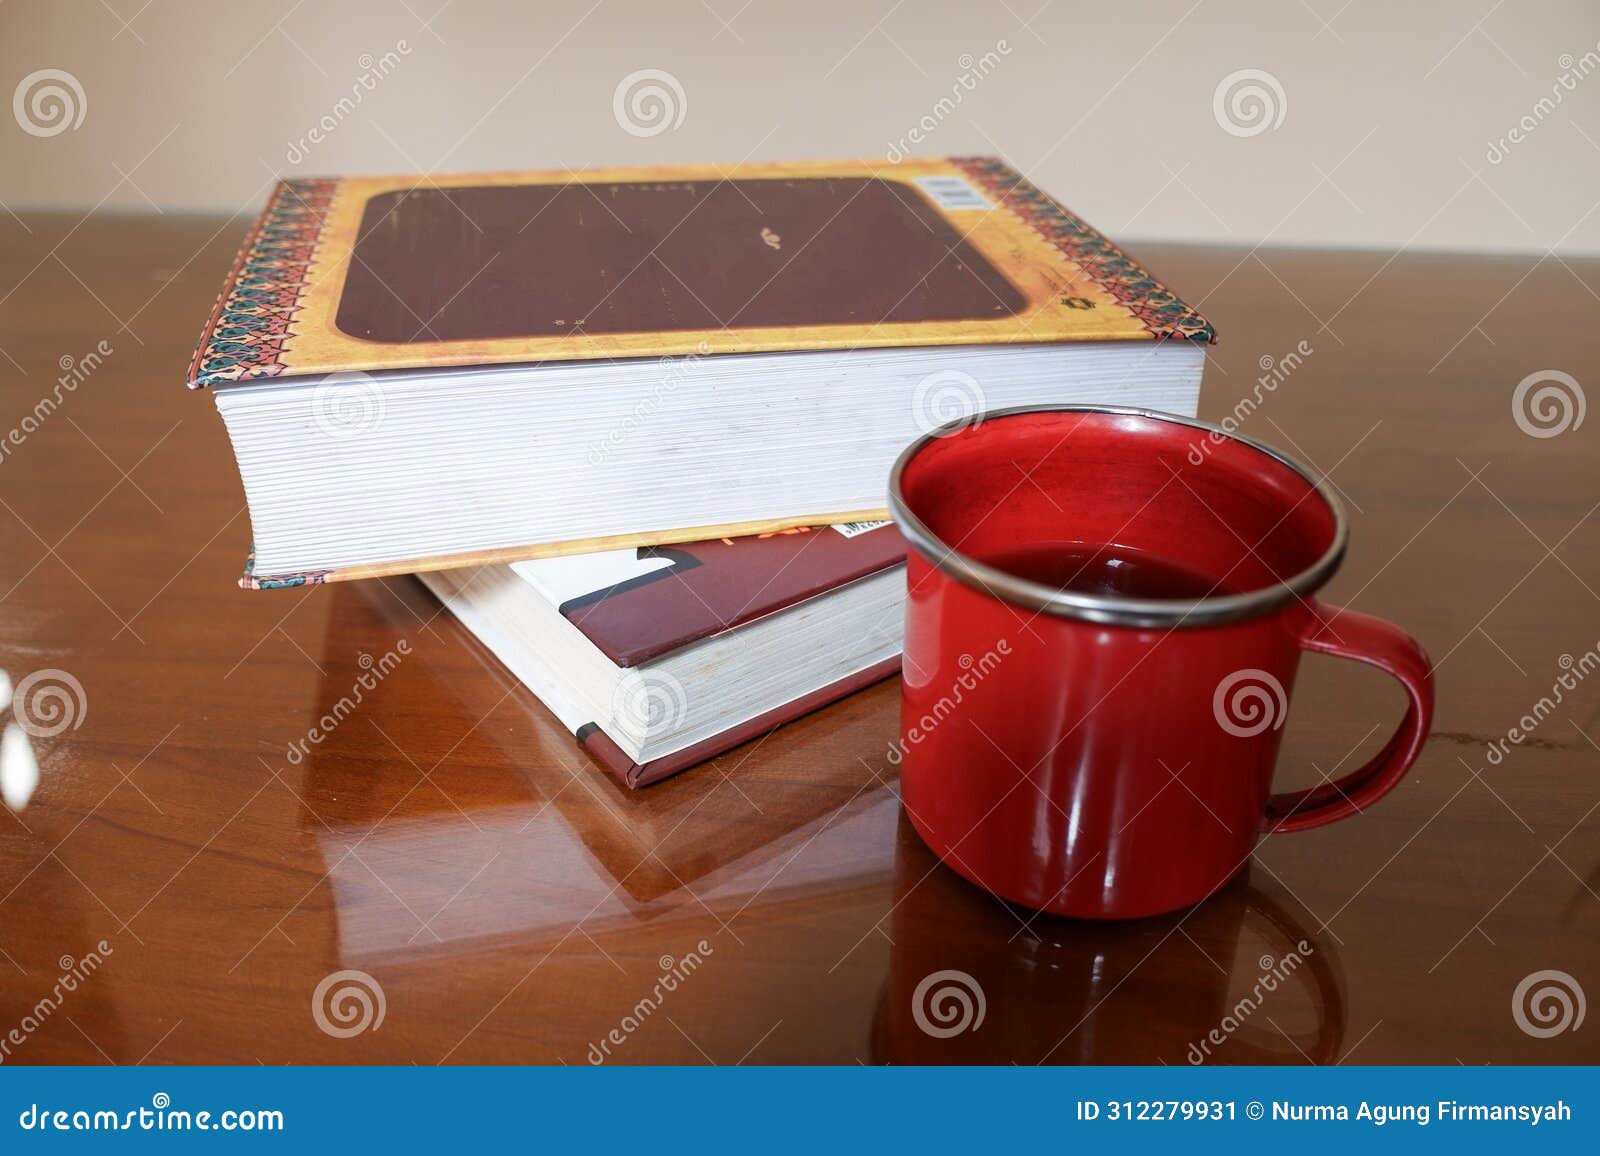 two books with a cup of coffee on a glassed table